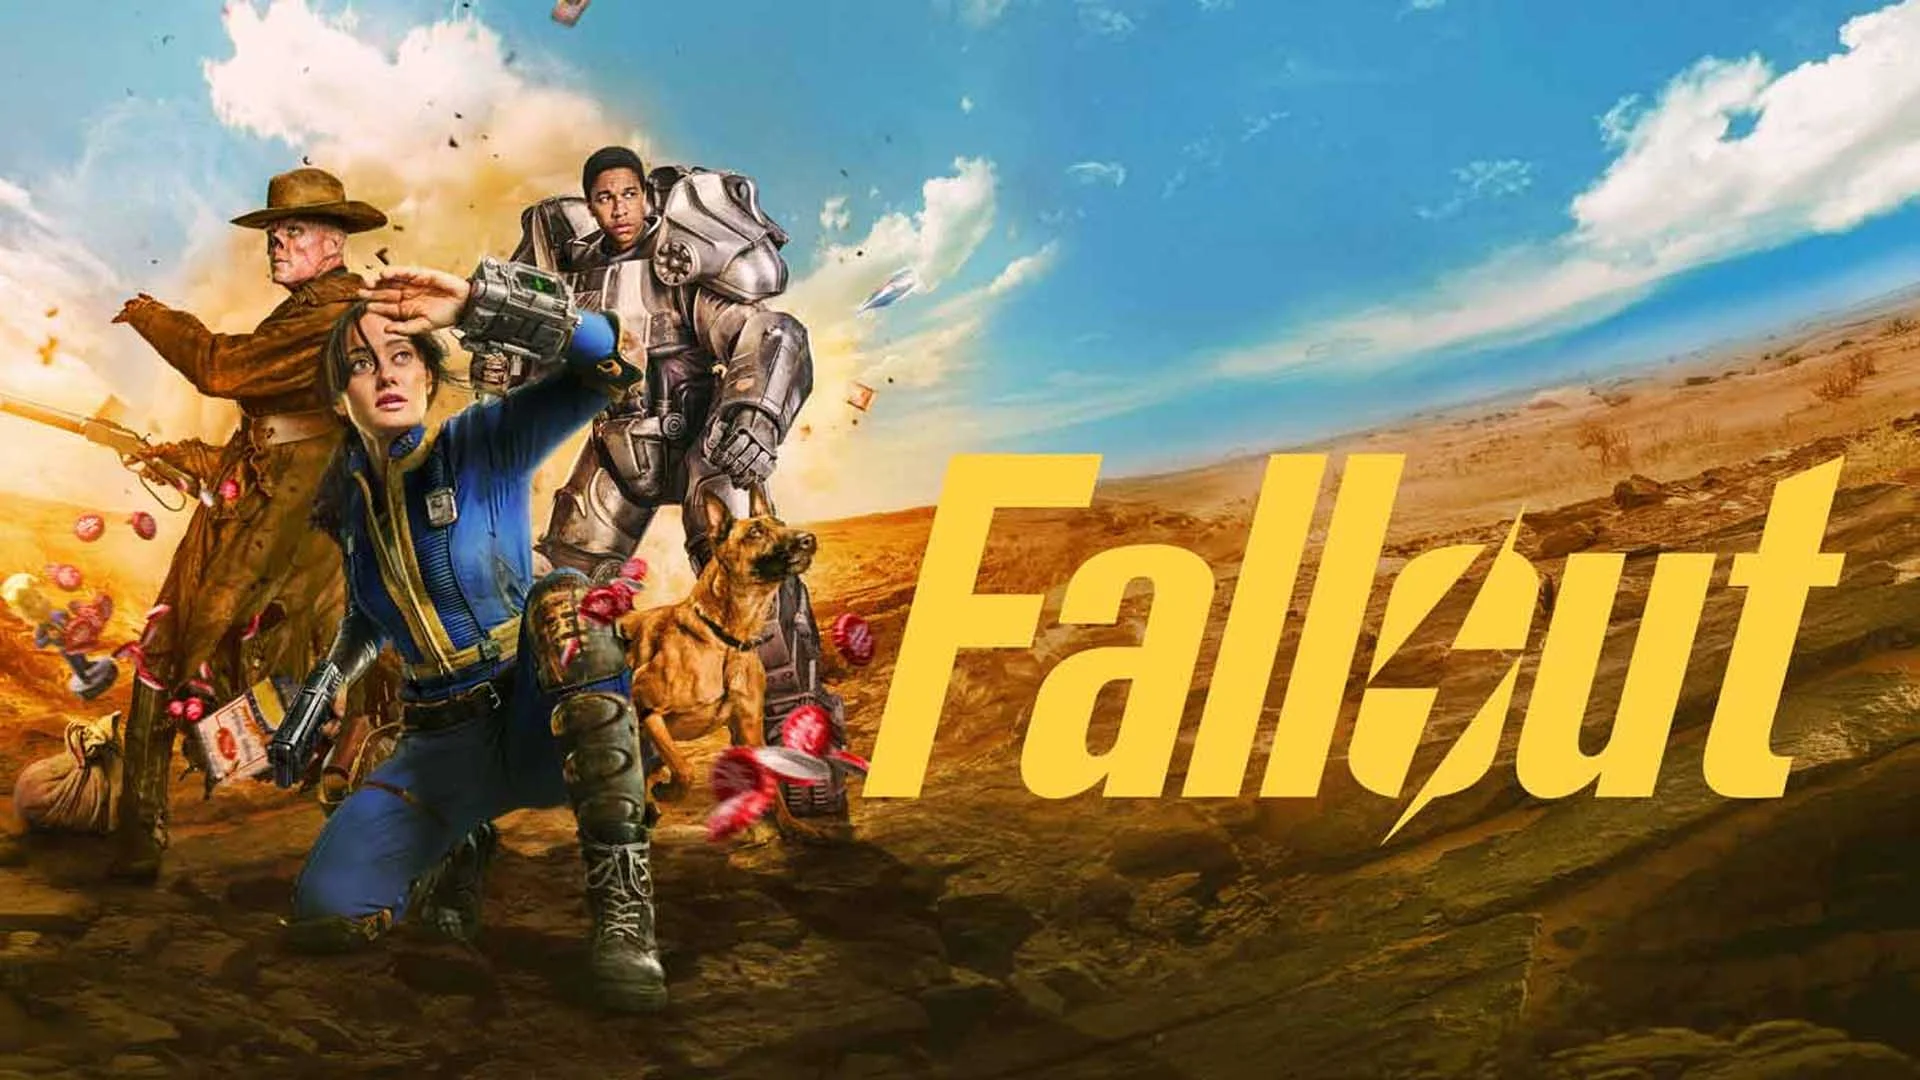 Official figurines of the main characters of the Fallout series have been released